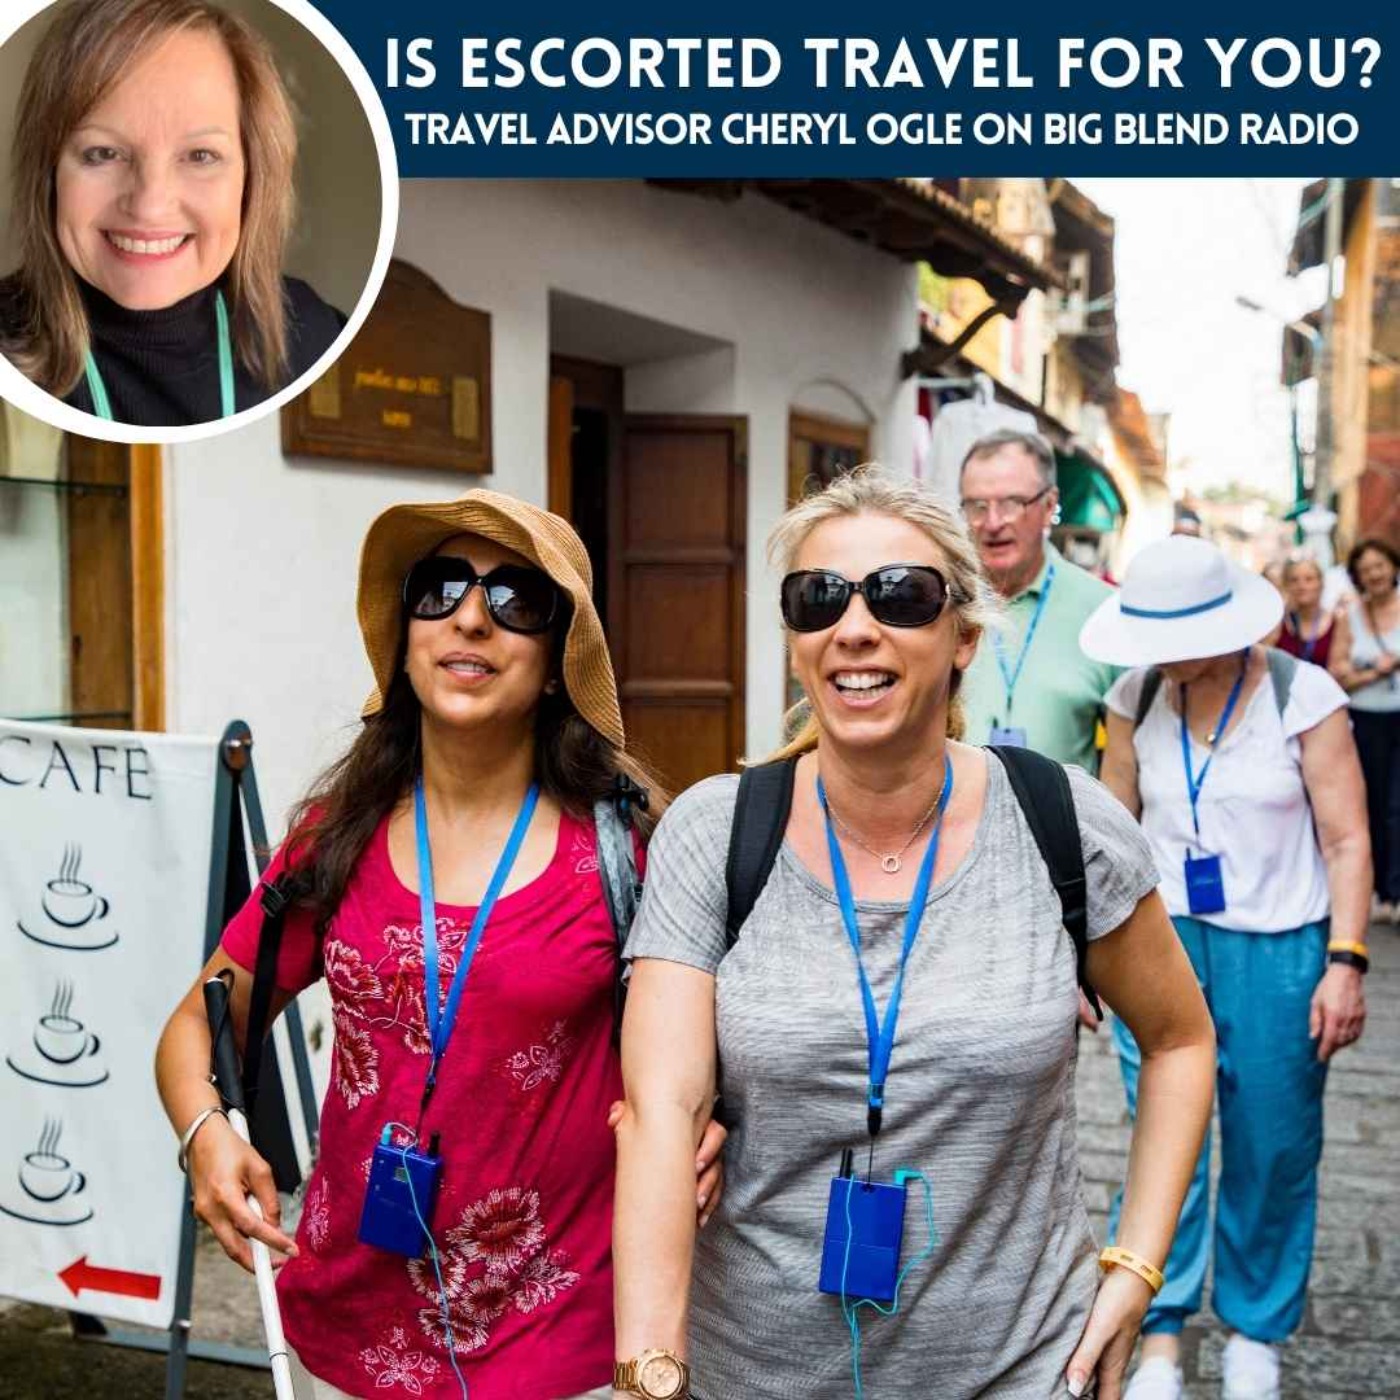 Cheryl Ogle - Is Escorted Travel for You?